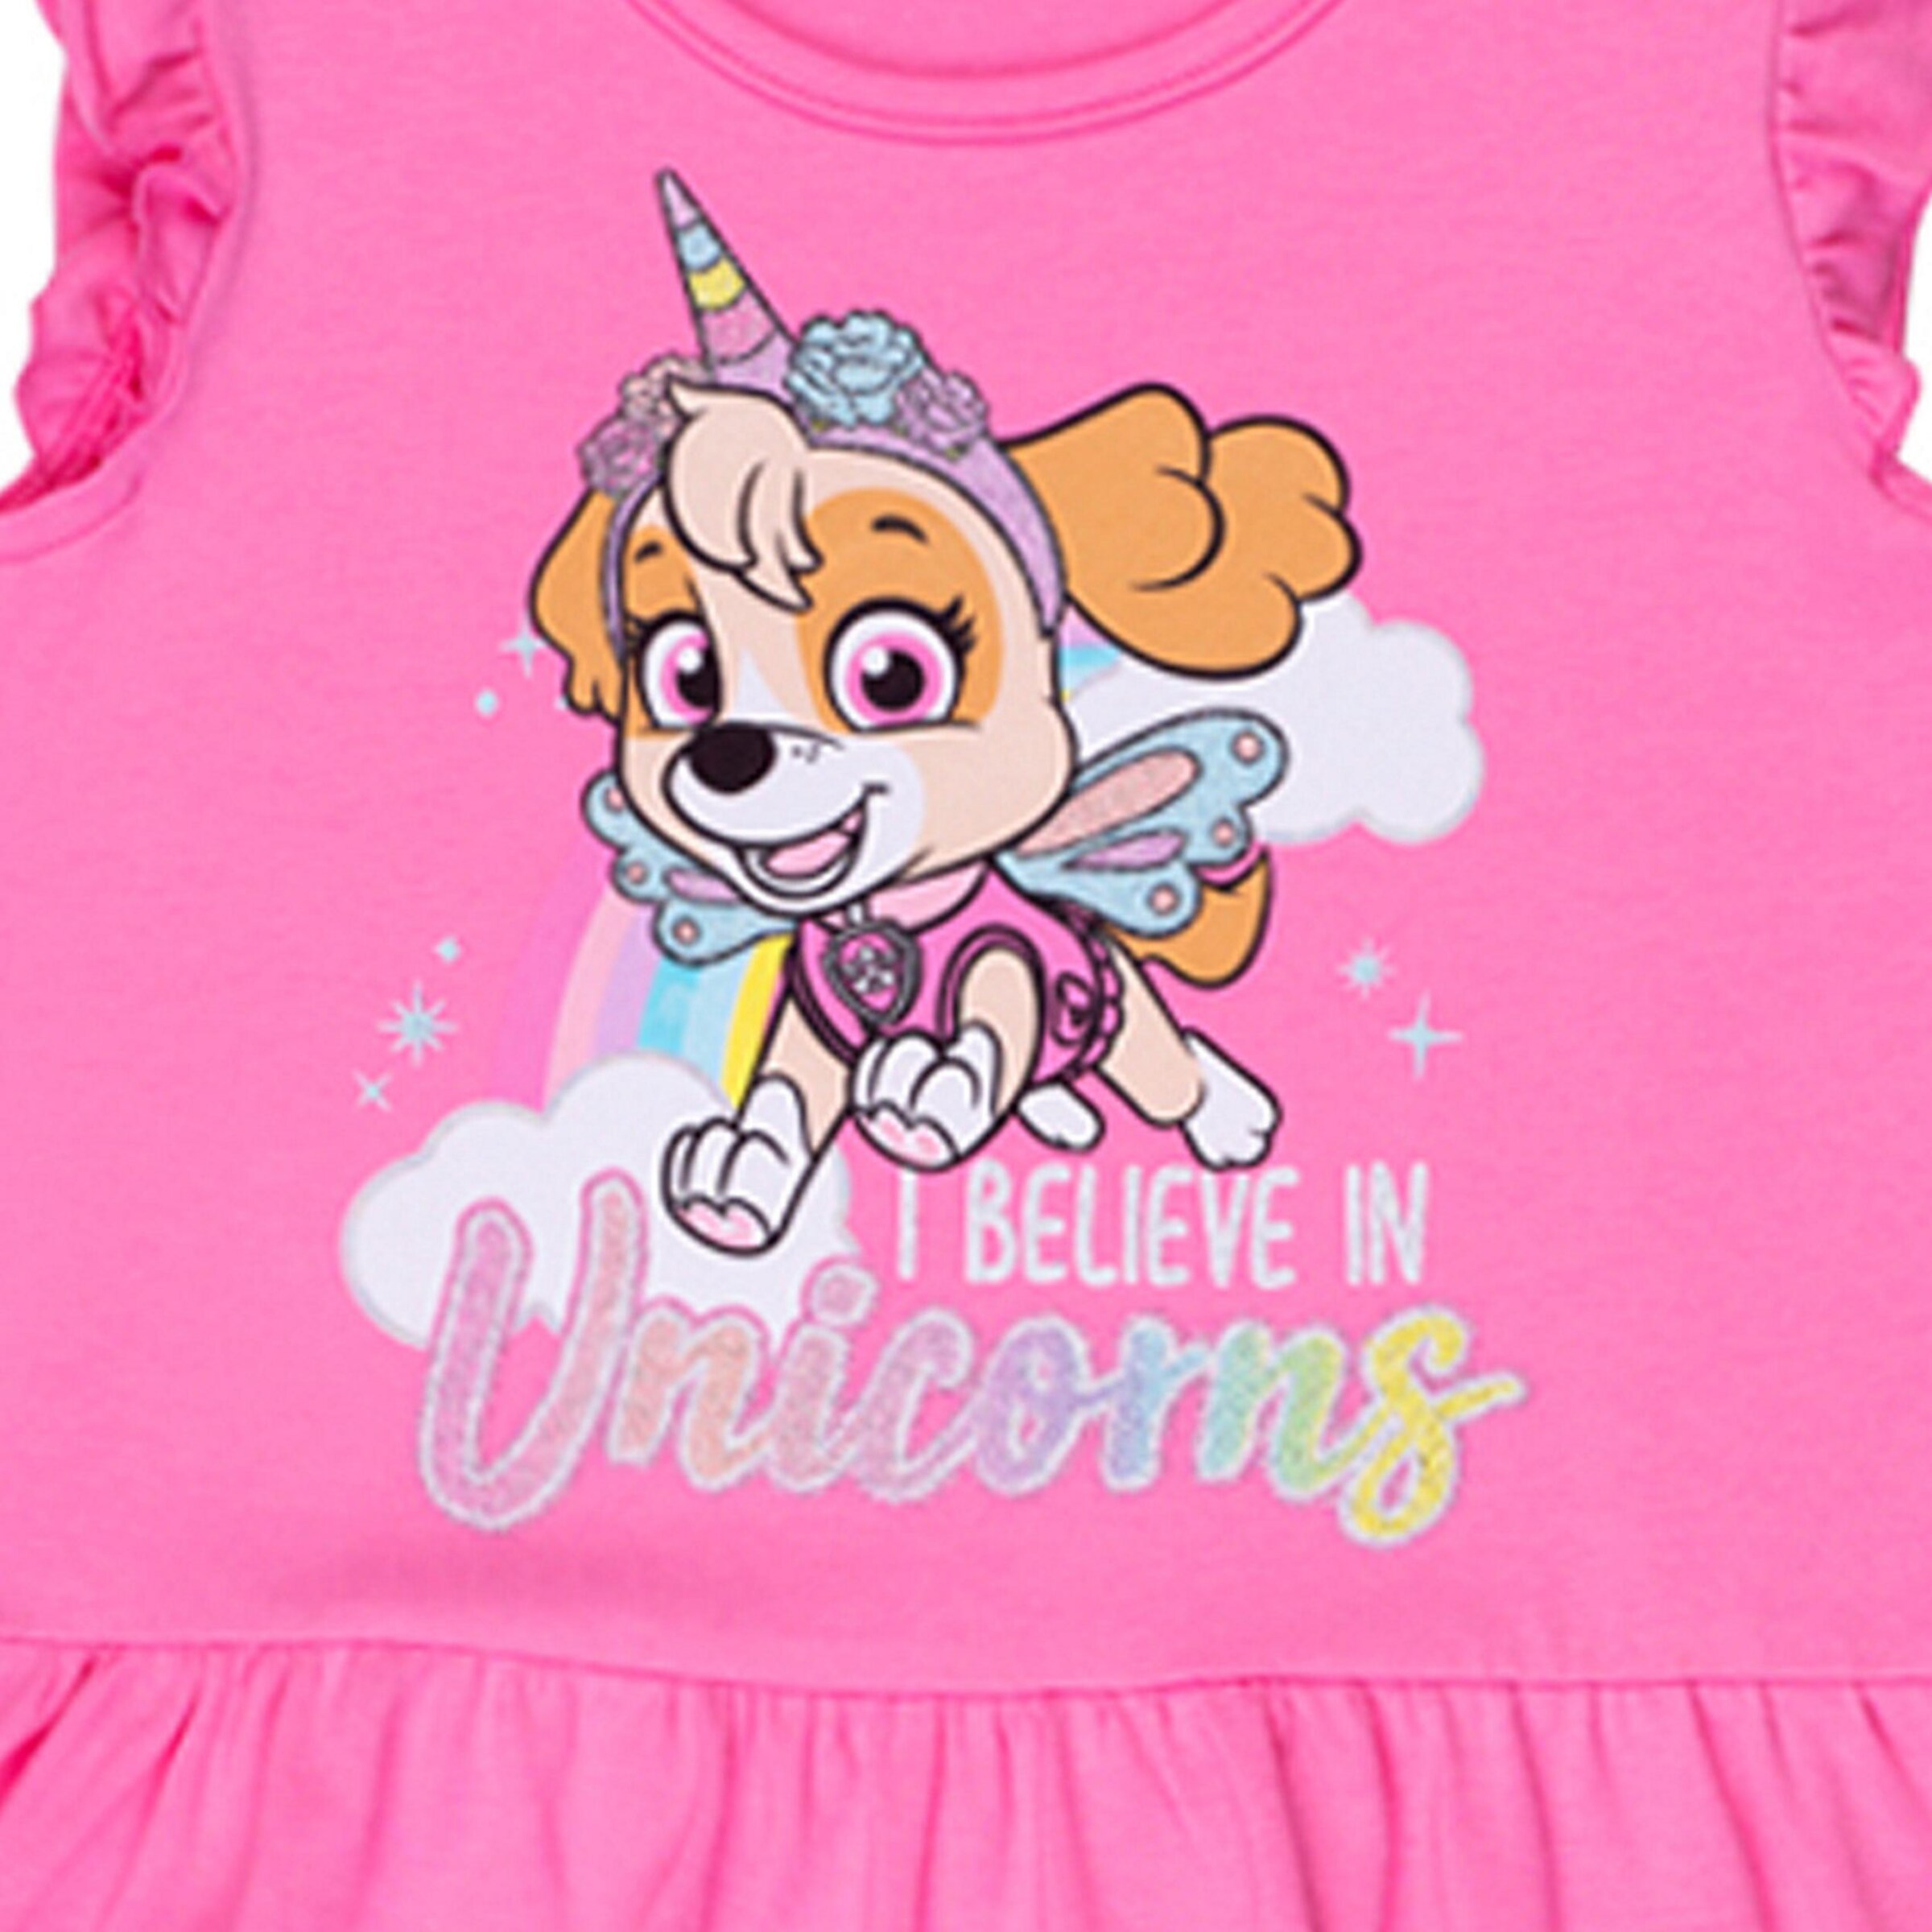 PAW Patrol Kleid in Pink | ABOUT YOU